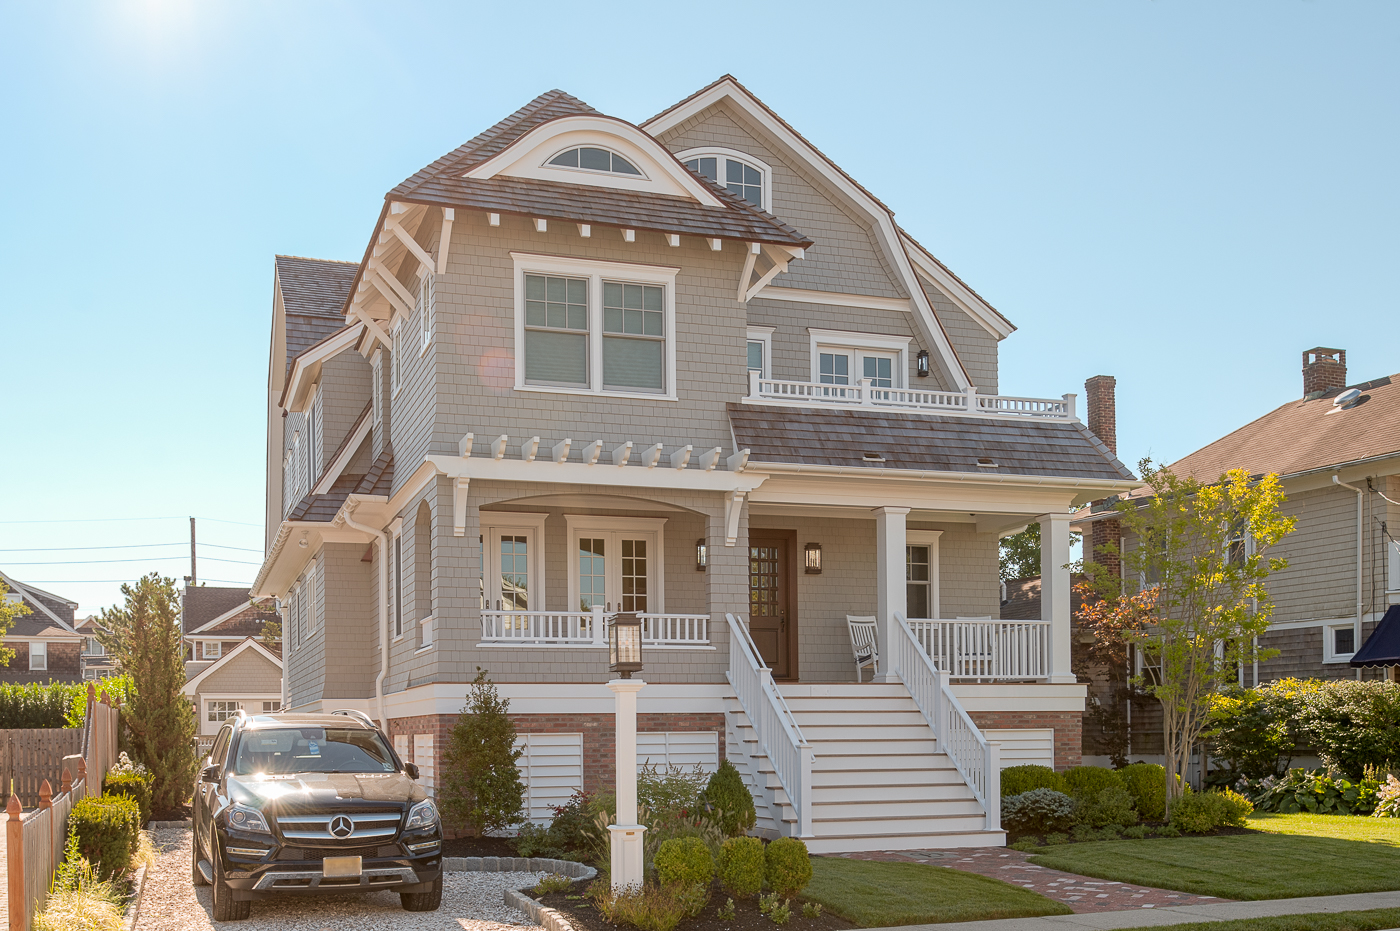 light neutral siding colors are great at boosting curb appeal